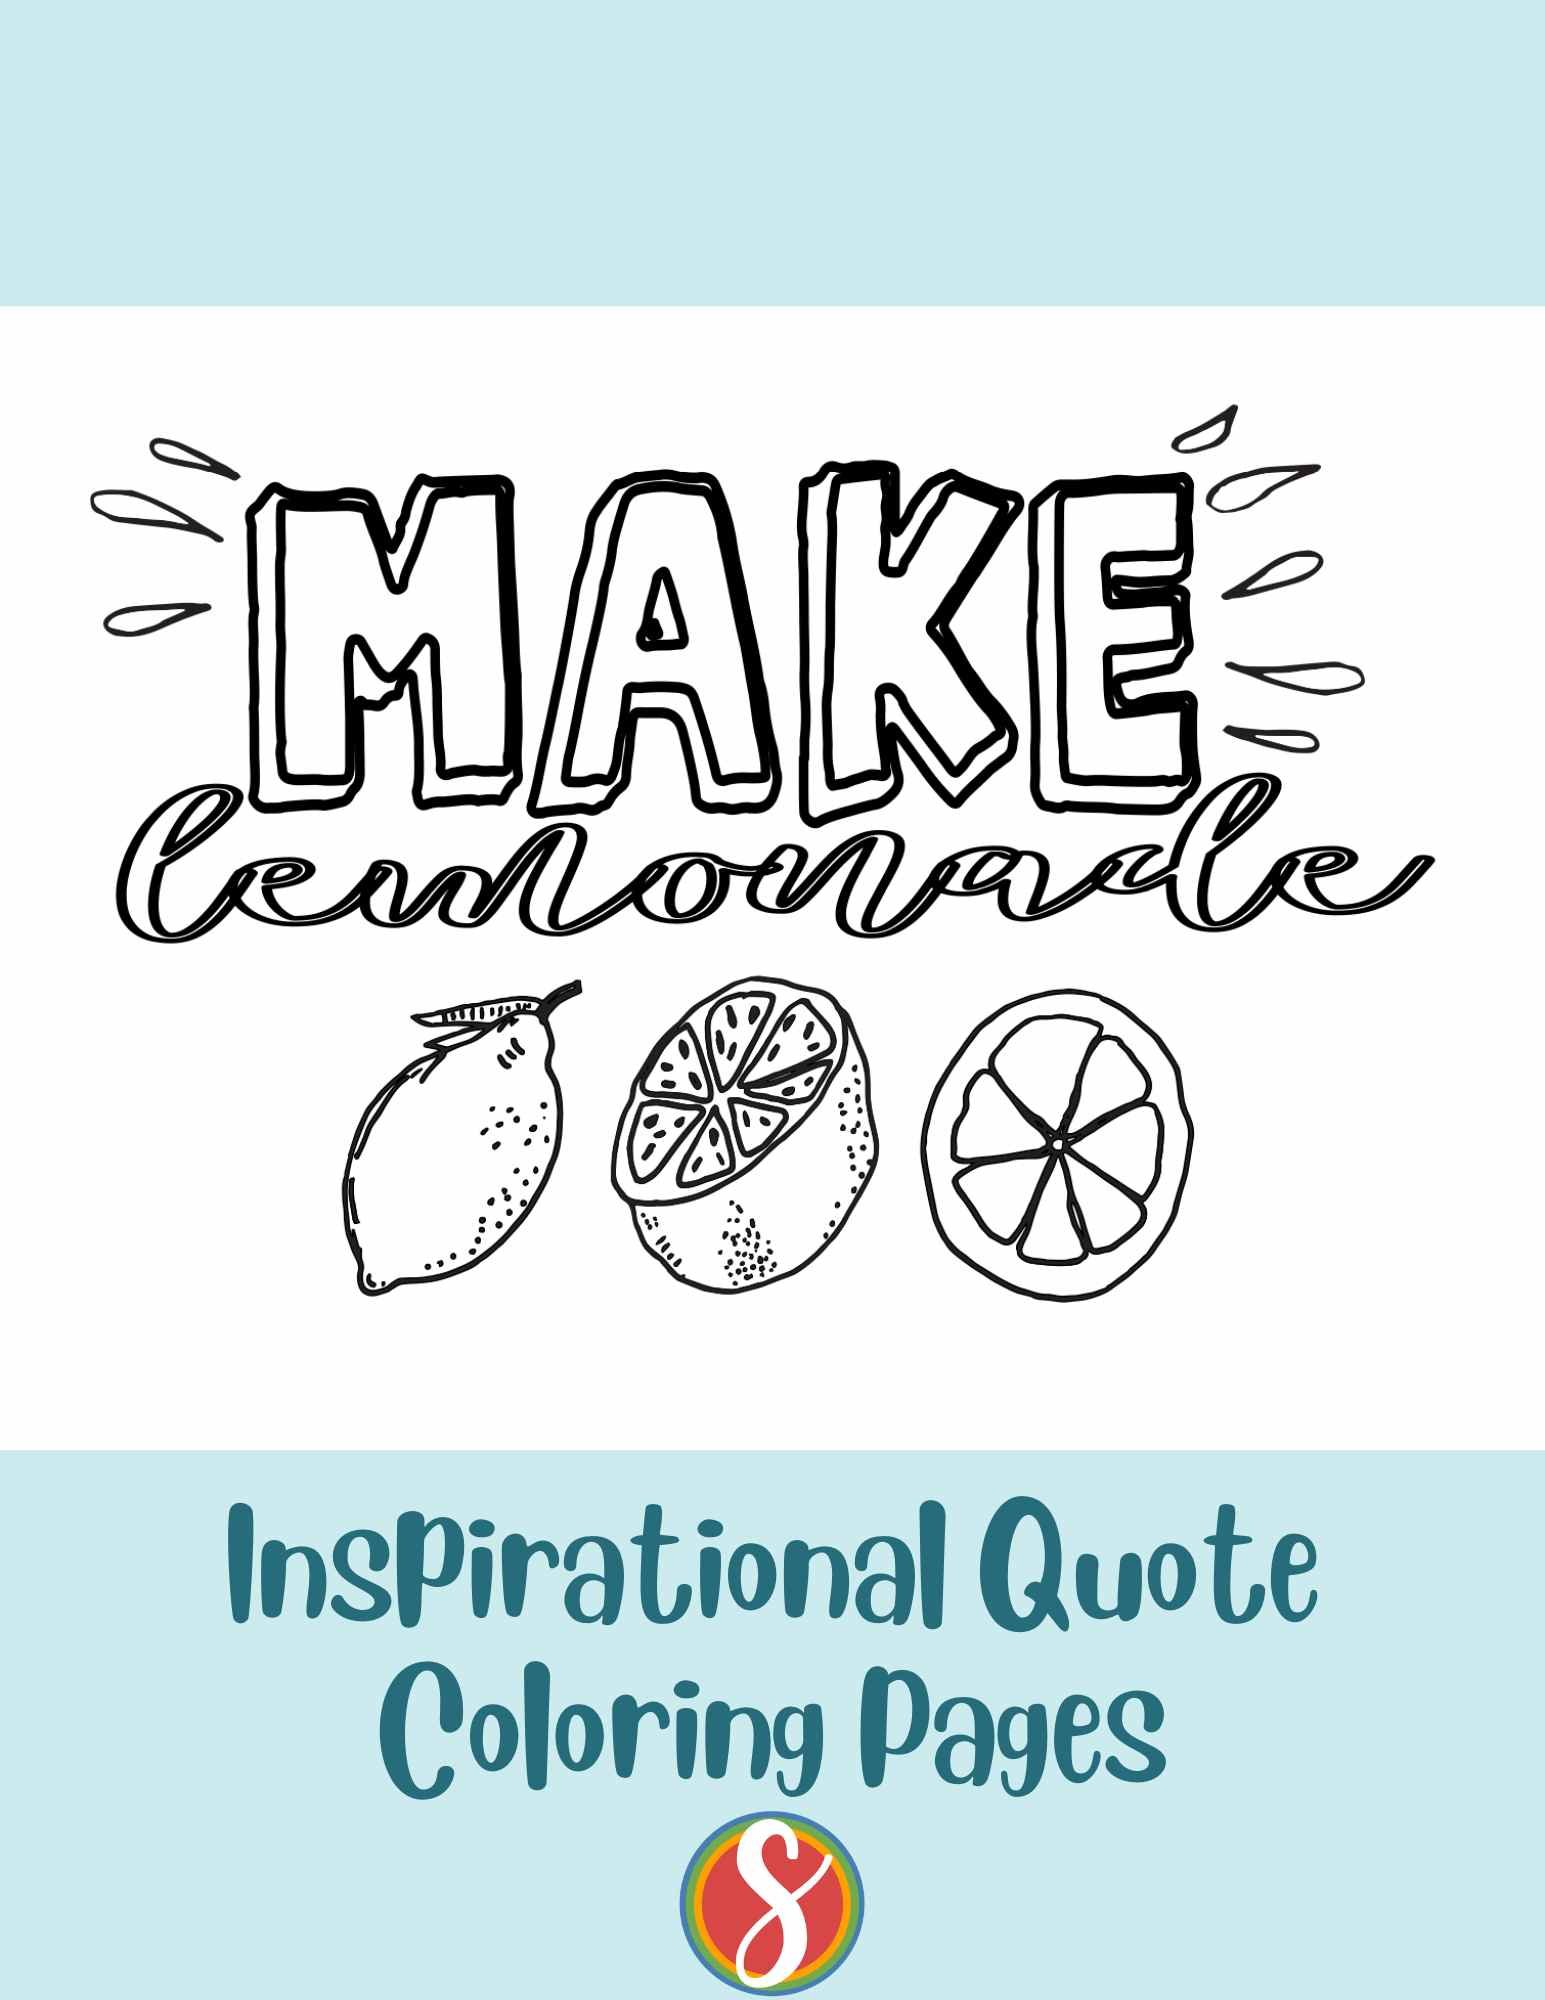 Free inspirational quote coloring pages â stevie doodles